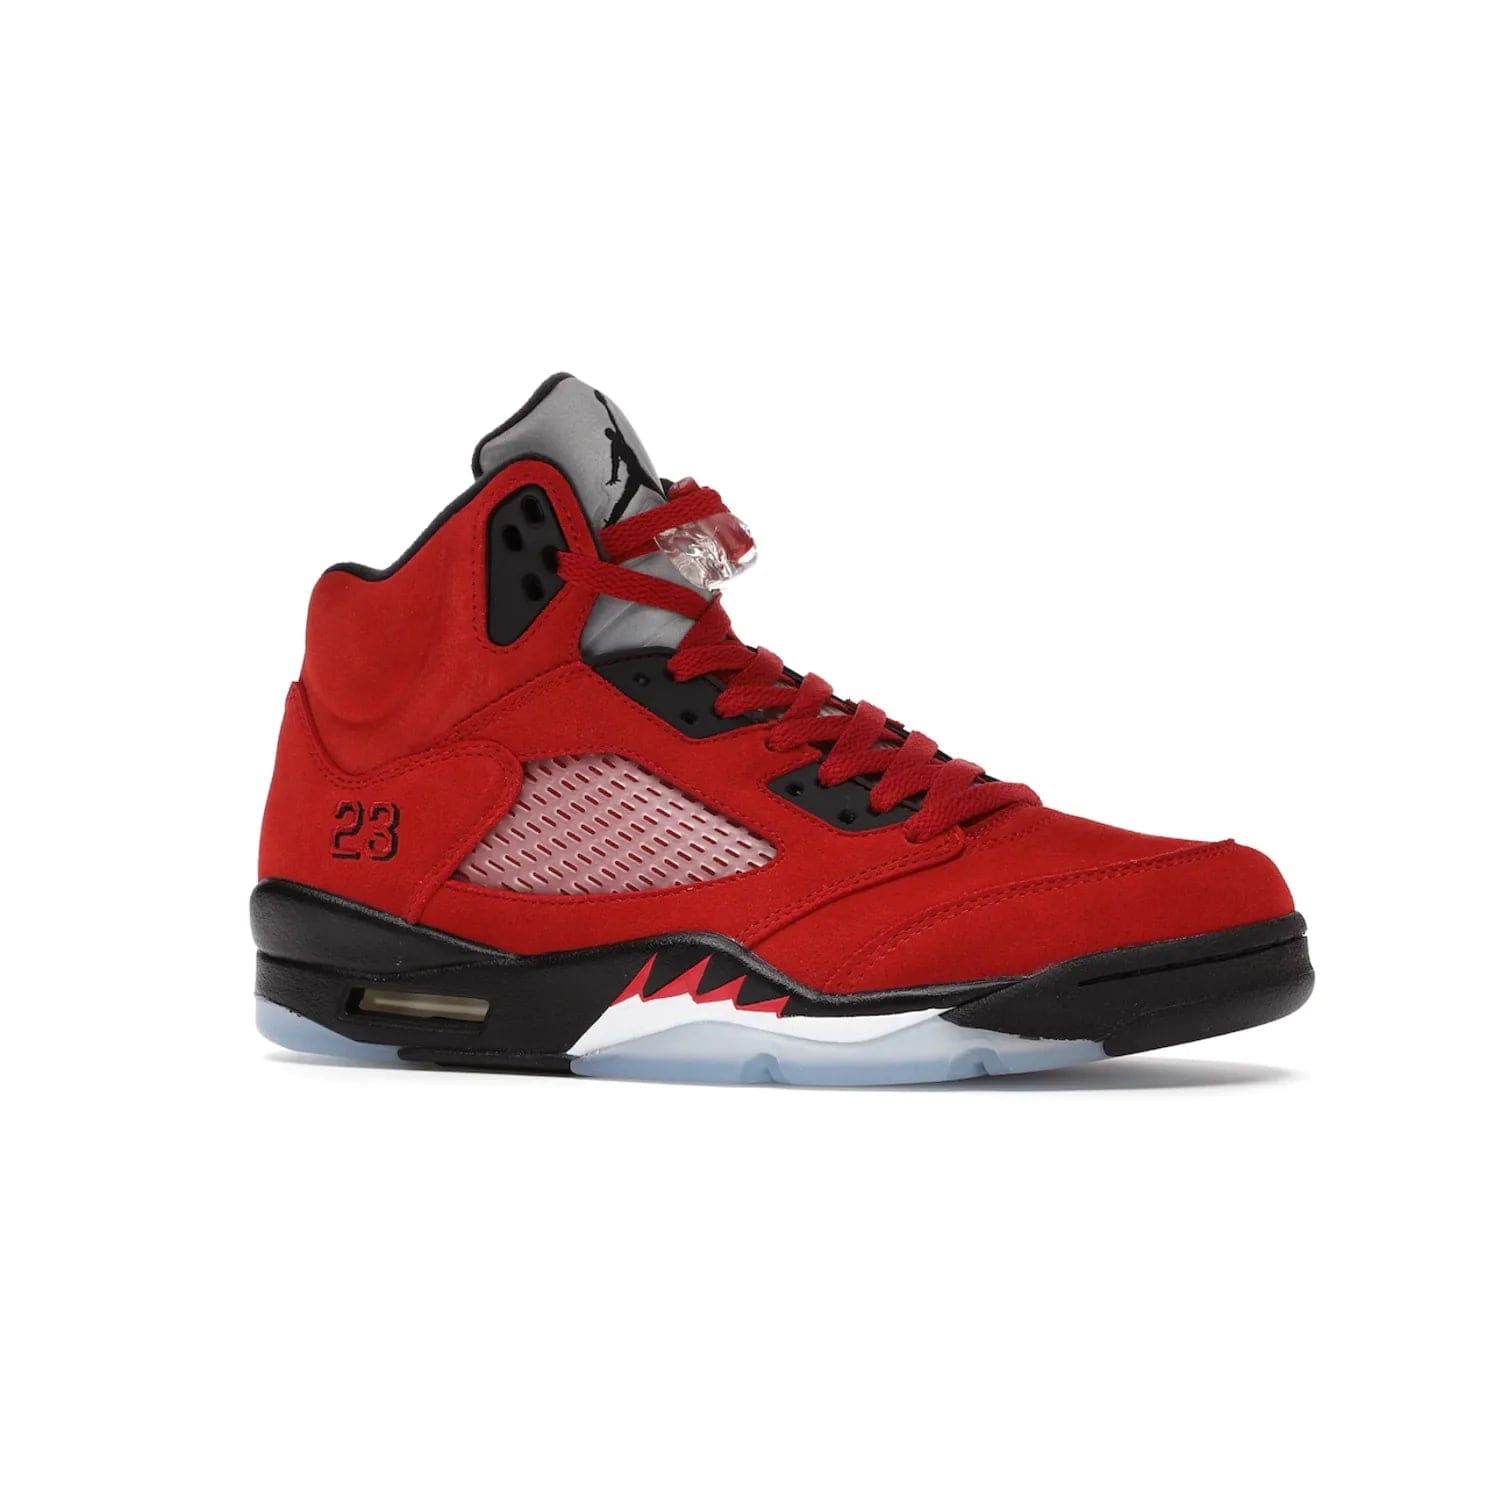 Jordan 5 Retro Raging Bull Red (2021) - Image 3 - Only at www.BallersClubKickz.com - Get ready for the 2021 stand-alone release of the Air Jordan 5 Raging Bulls! This all-suede upper combines luxe details like a Jumpman logo, red & black "23" embroidery and shark tooth detailing, atop a black midsole. Don't miss out - release date in April 2021 for $190.